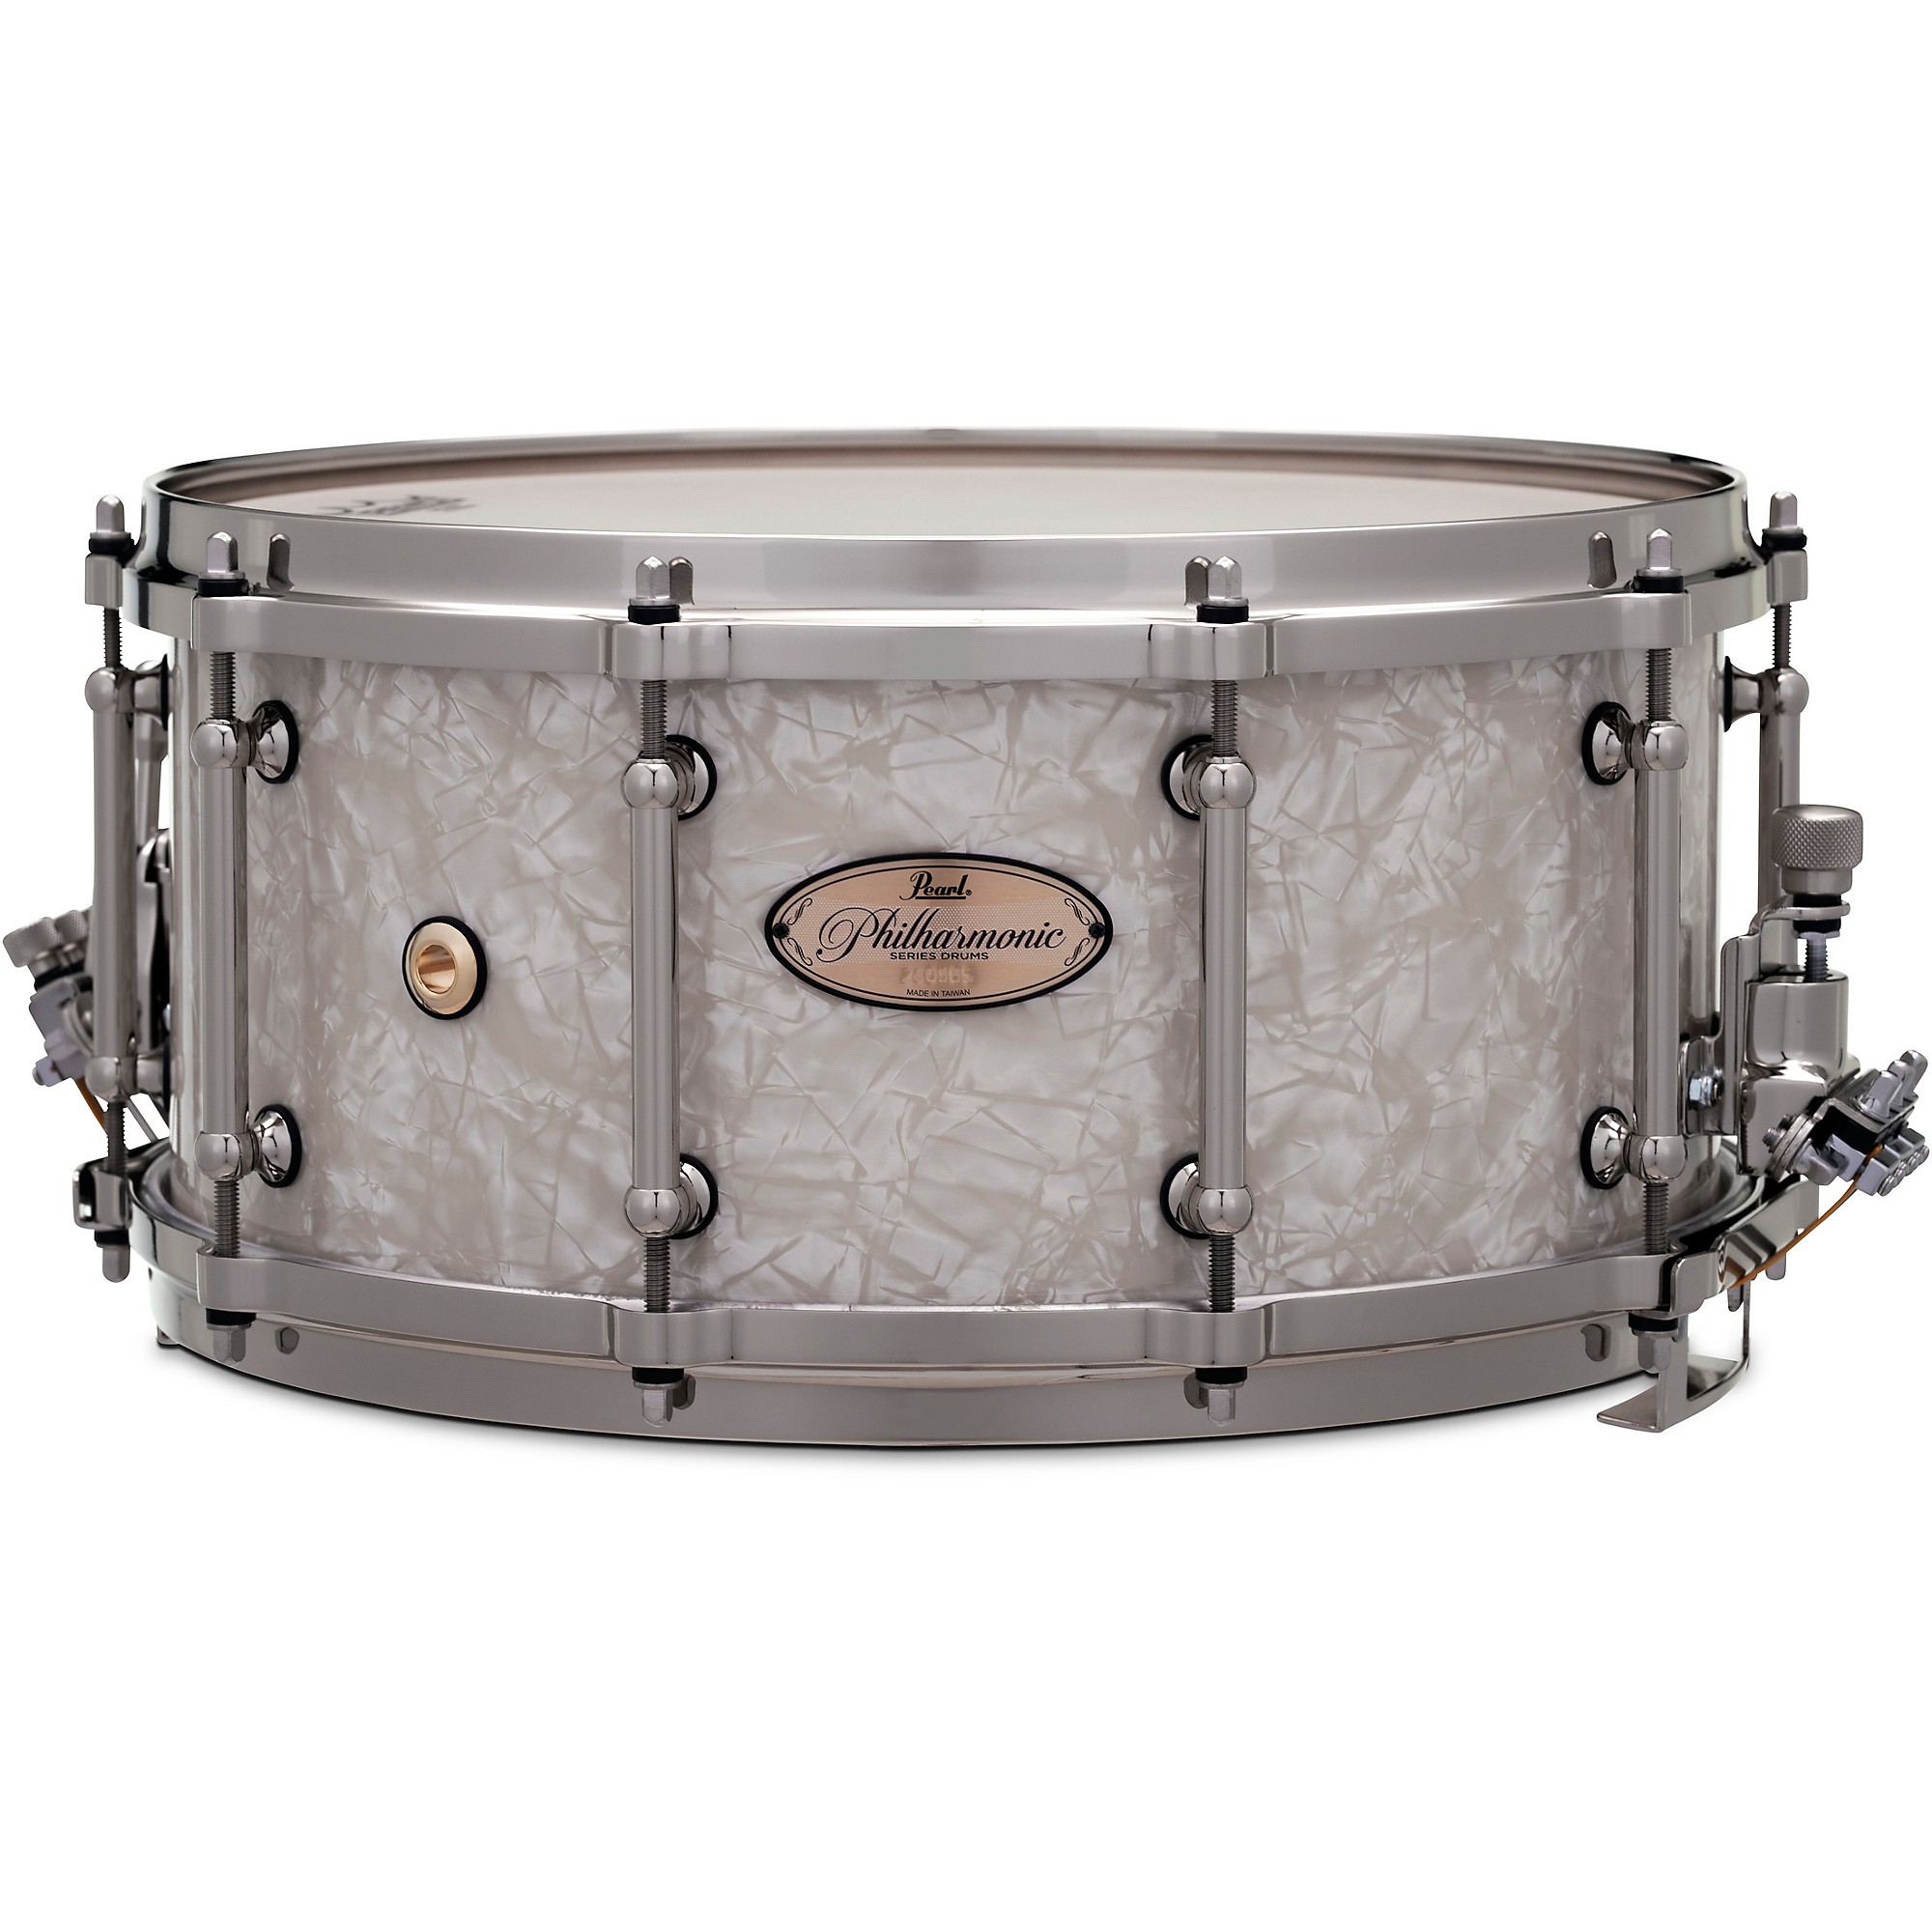 Pearl Philharmonic Maple Snare Drum 14 x 6.5 in. Nicotine White Marine Pearl